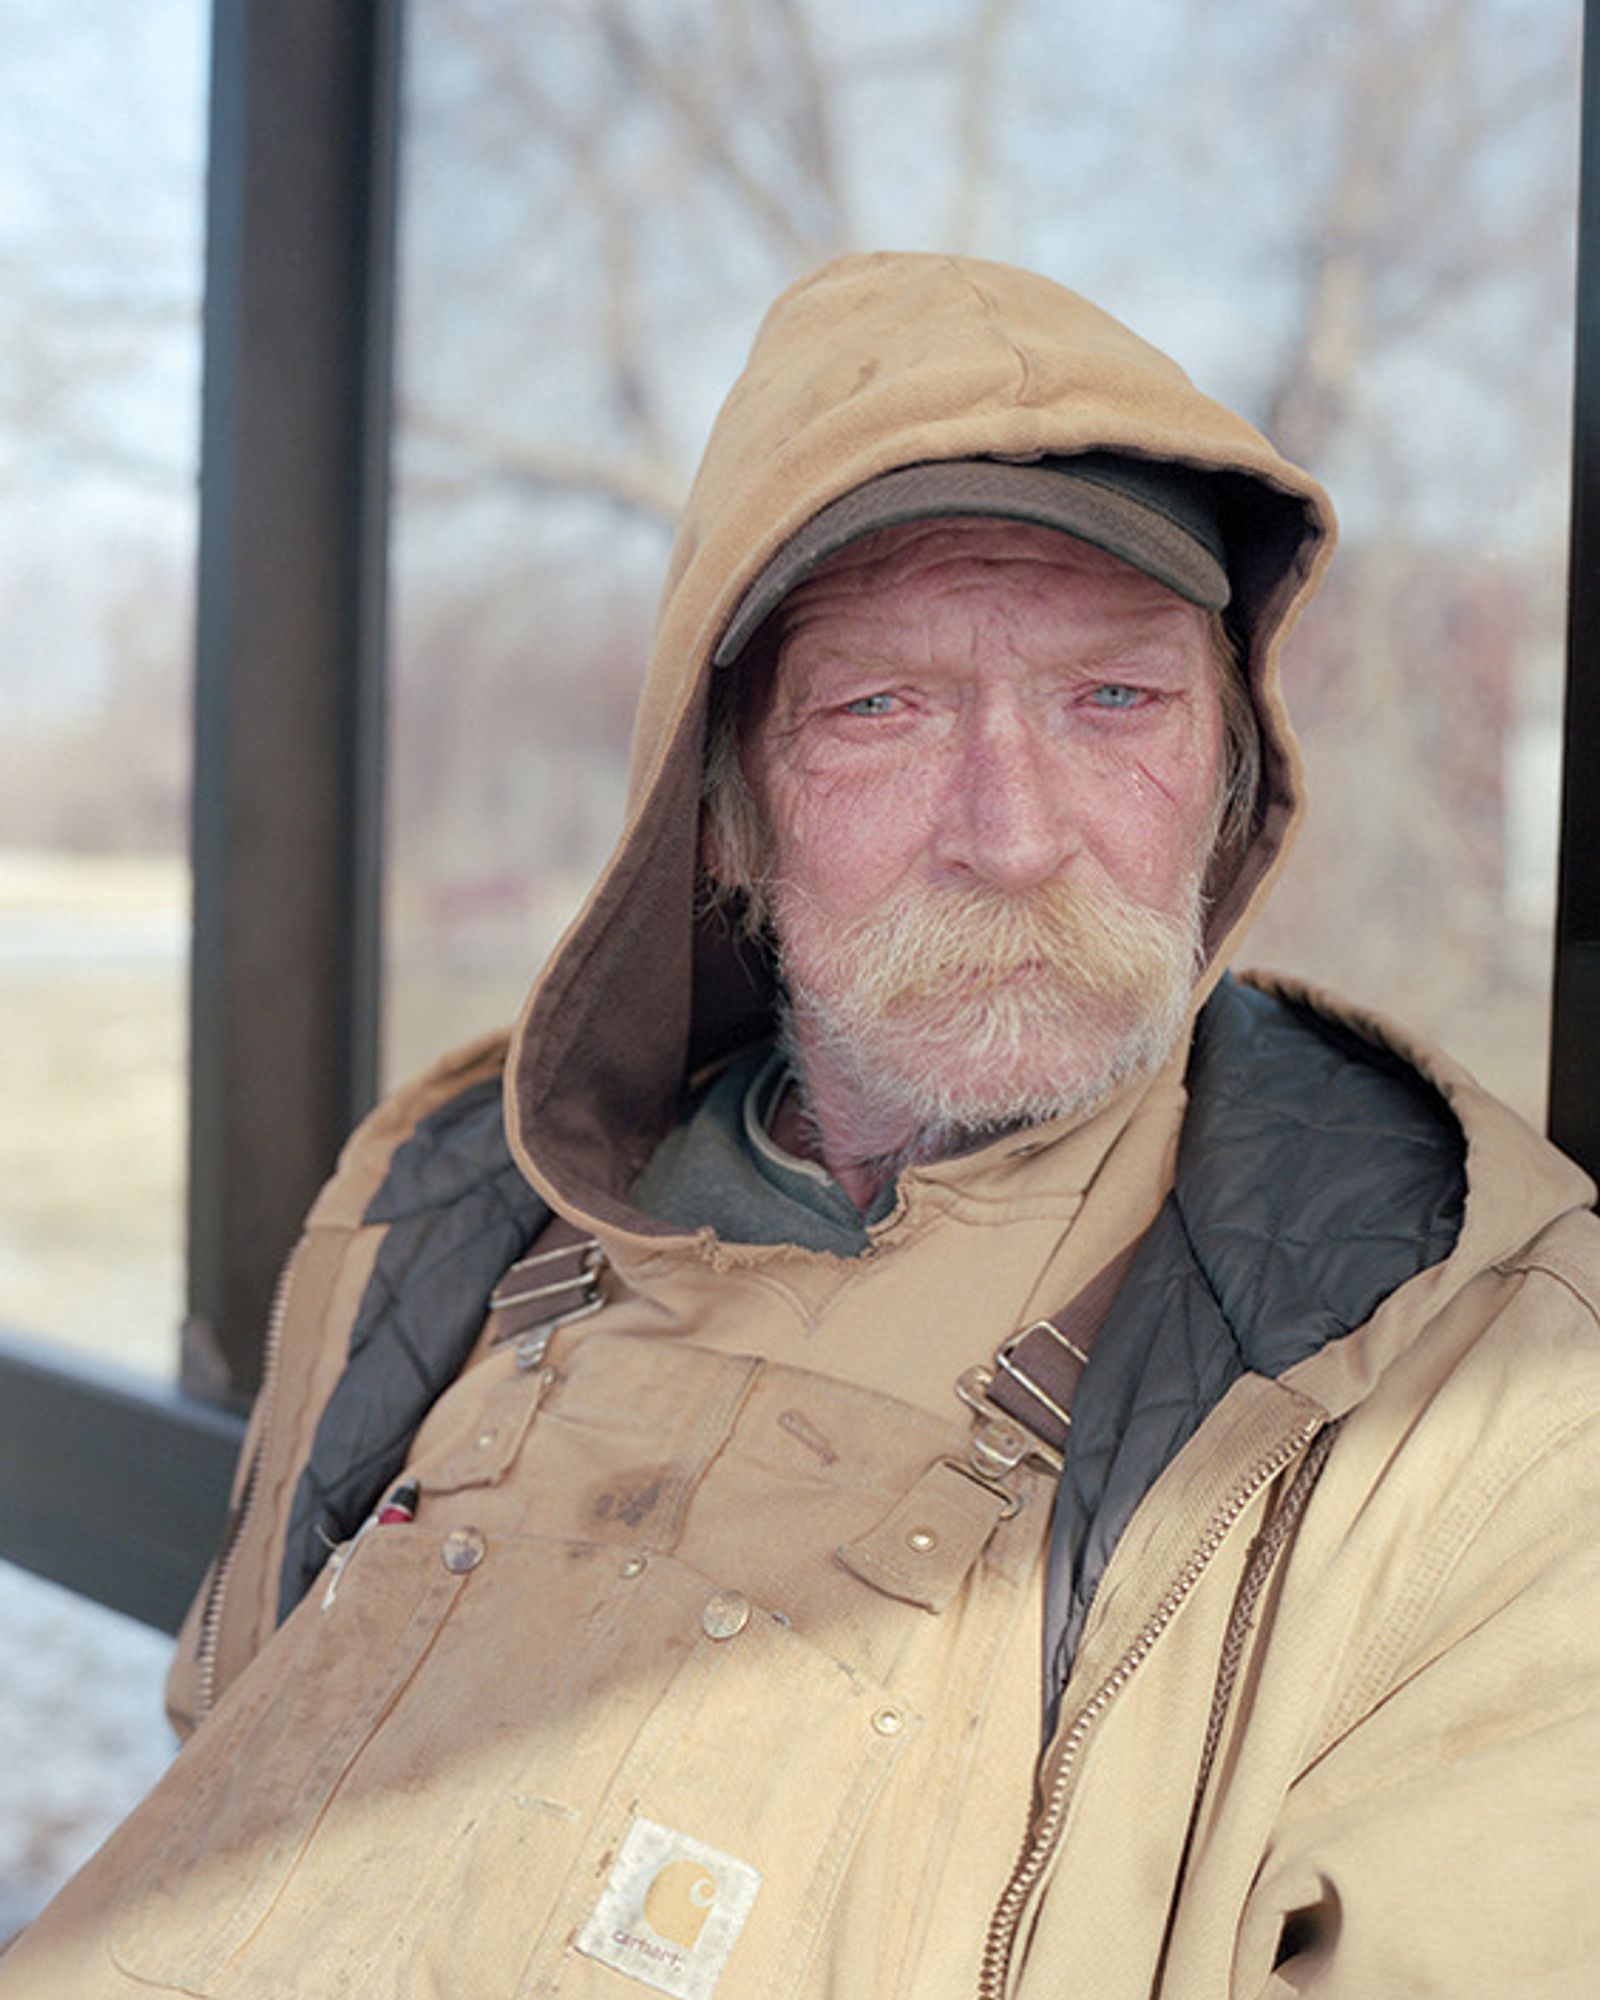 © Juan Madrid - Steve at a bus stop. He works as a laborer and has lived 40 years in Flint.